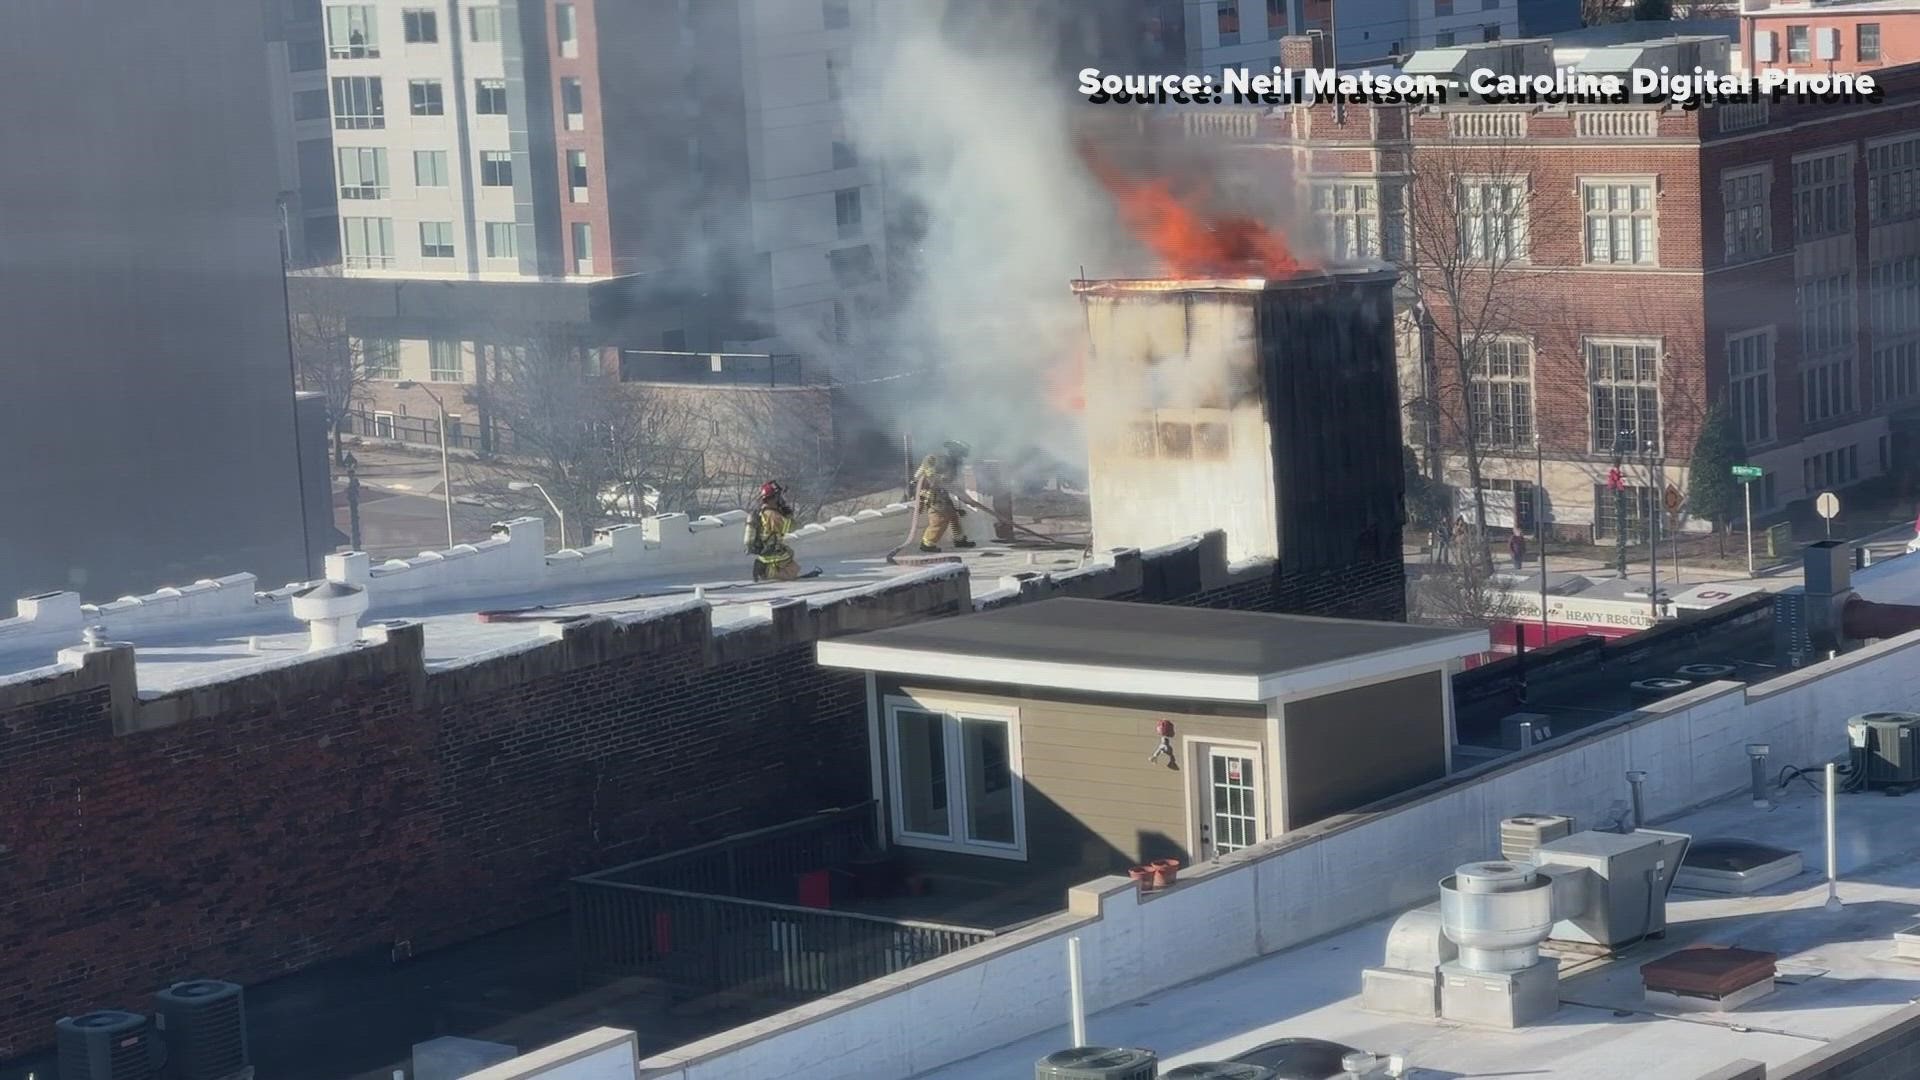 Firefighters worked to get a building fire under control in downtown Greensboro Friday morning.